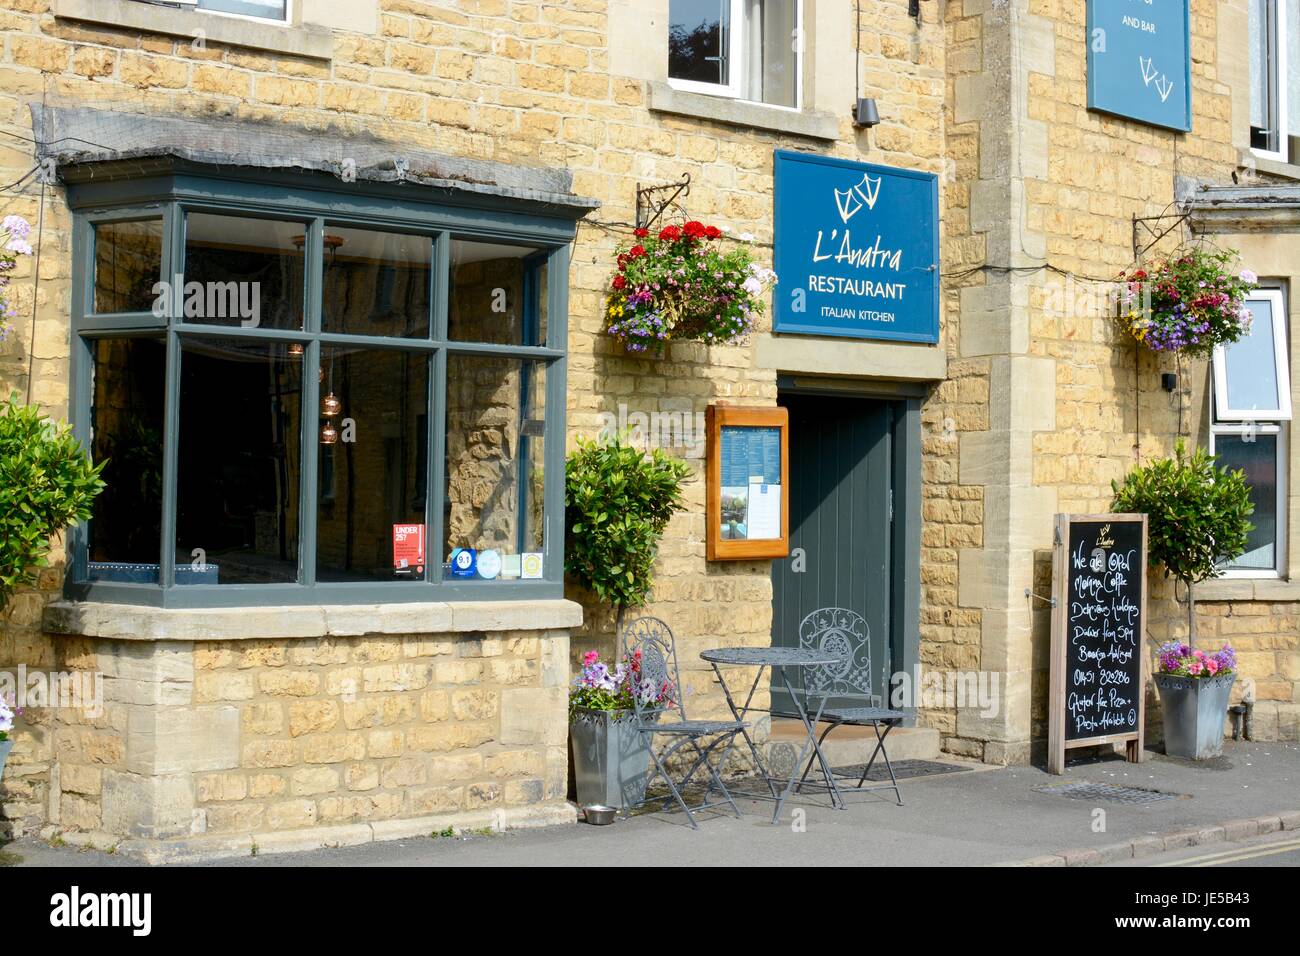 L'Abattra restaurant in Bourton on the Water,Cotswolds,England Stock Photo